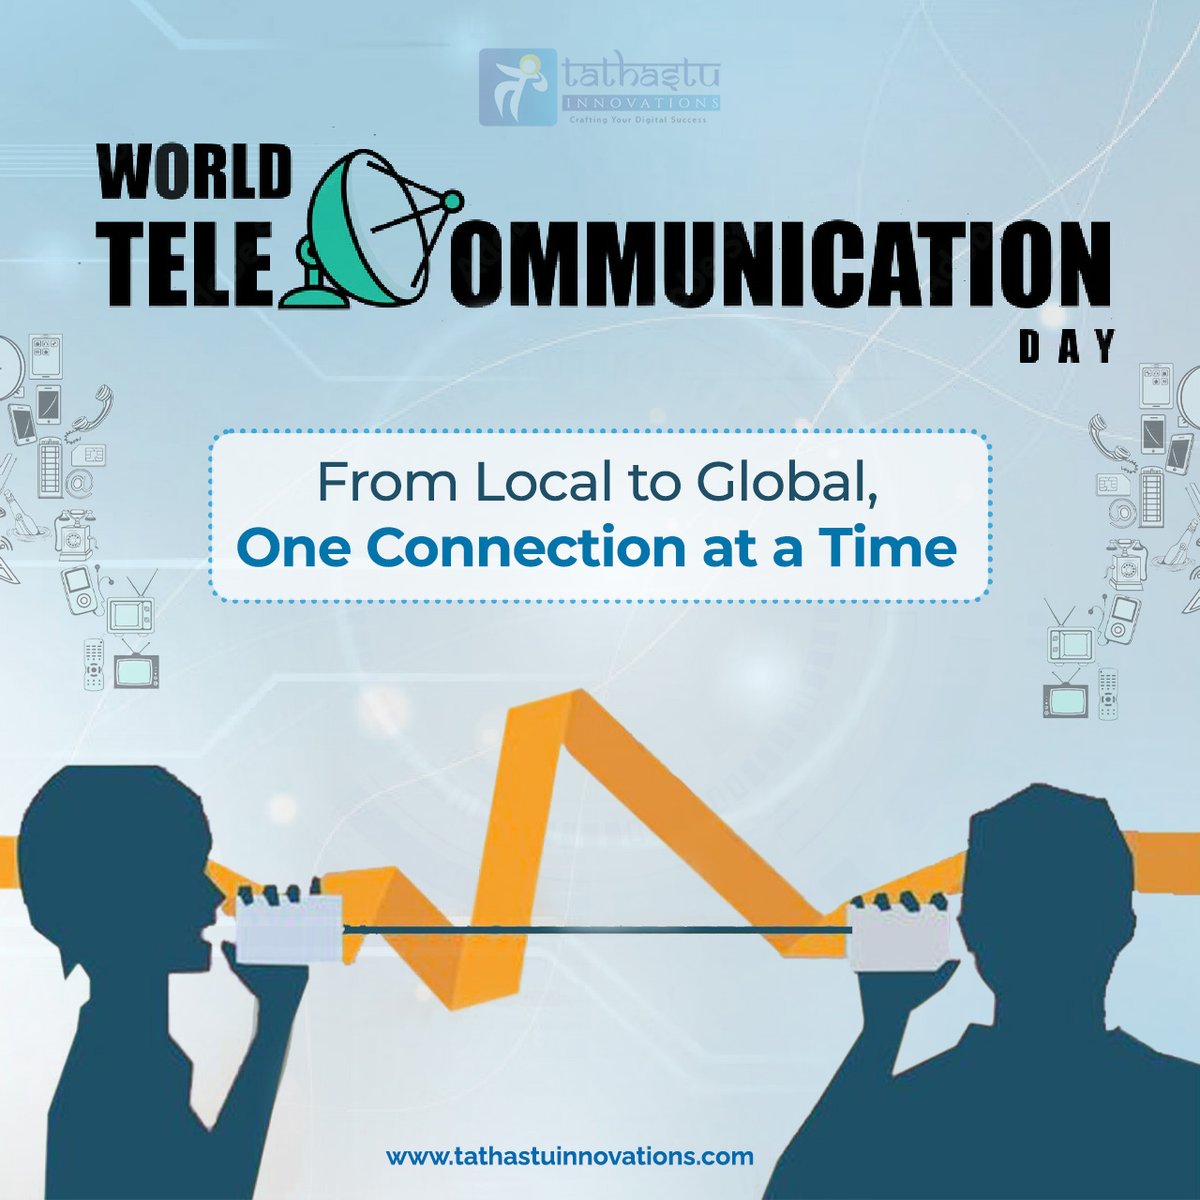 This World Telecommunication Day, let's embrace the power of connectivity and communication that brings us closer.  
Visit us:🌐tathastuinnovations.com 
📞+91 90348 89088
#WorldTelecommunicationDay #PowerOfCommunication #BridgingContinents #ConnectedWorld